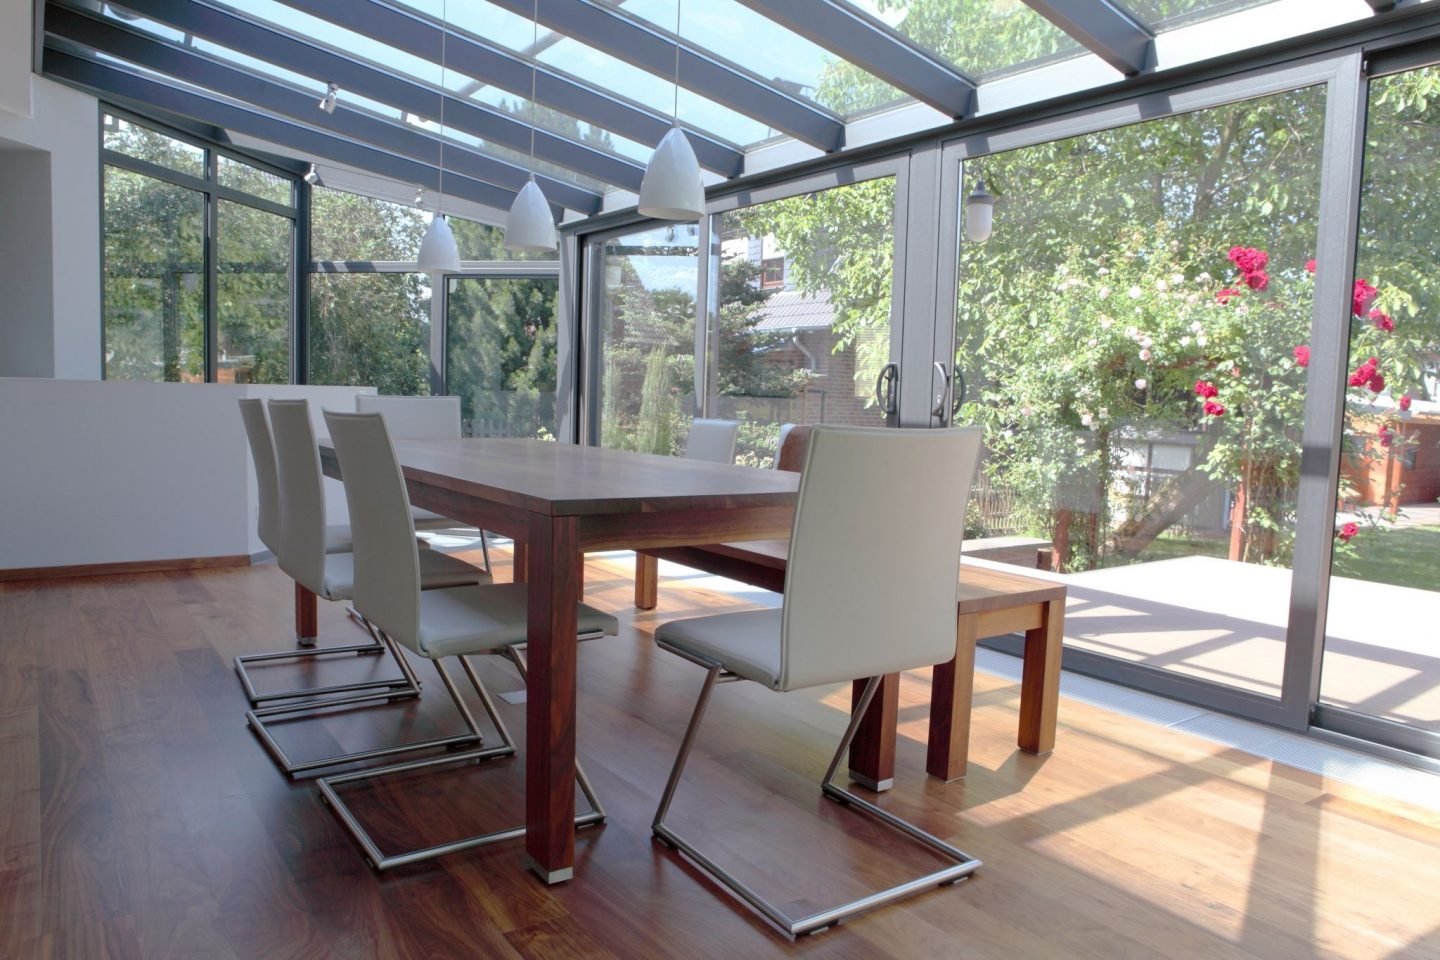 How to extend your kitchen with a conservatory www.extraordinarychaos.com